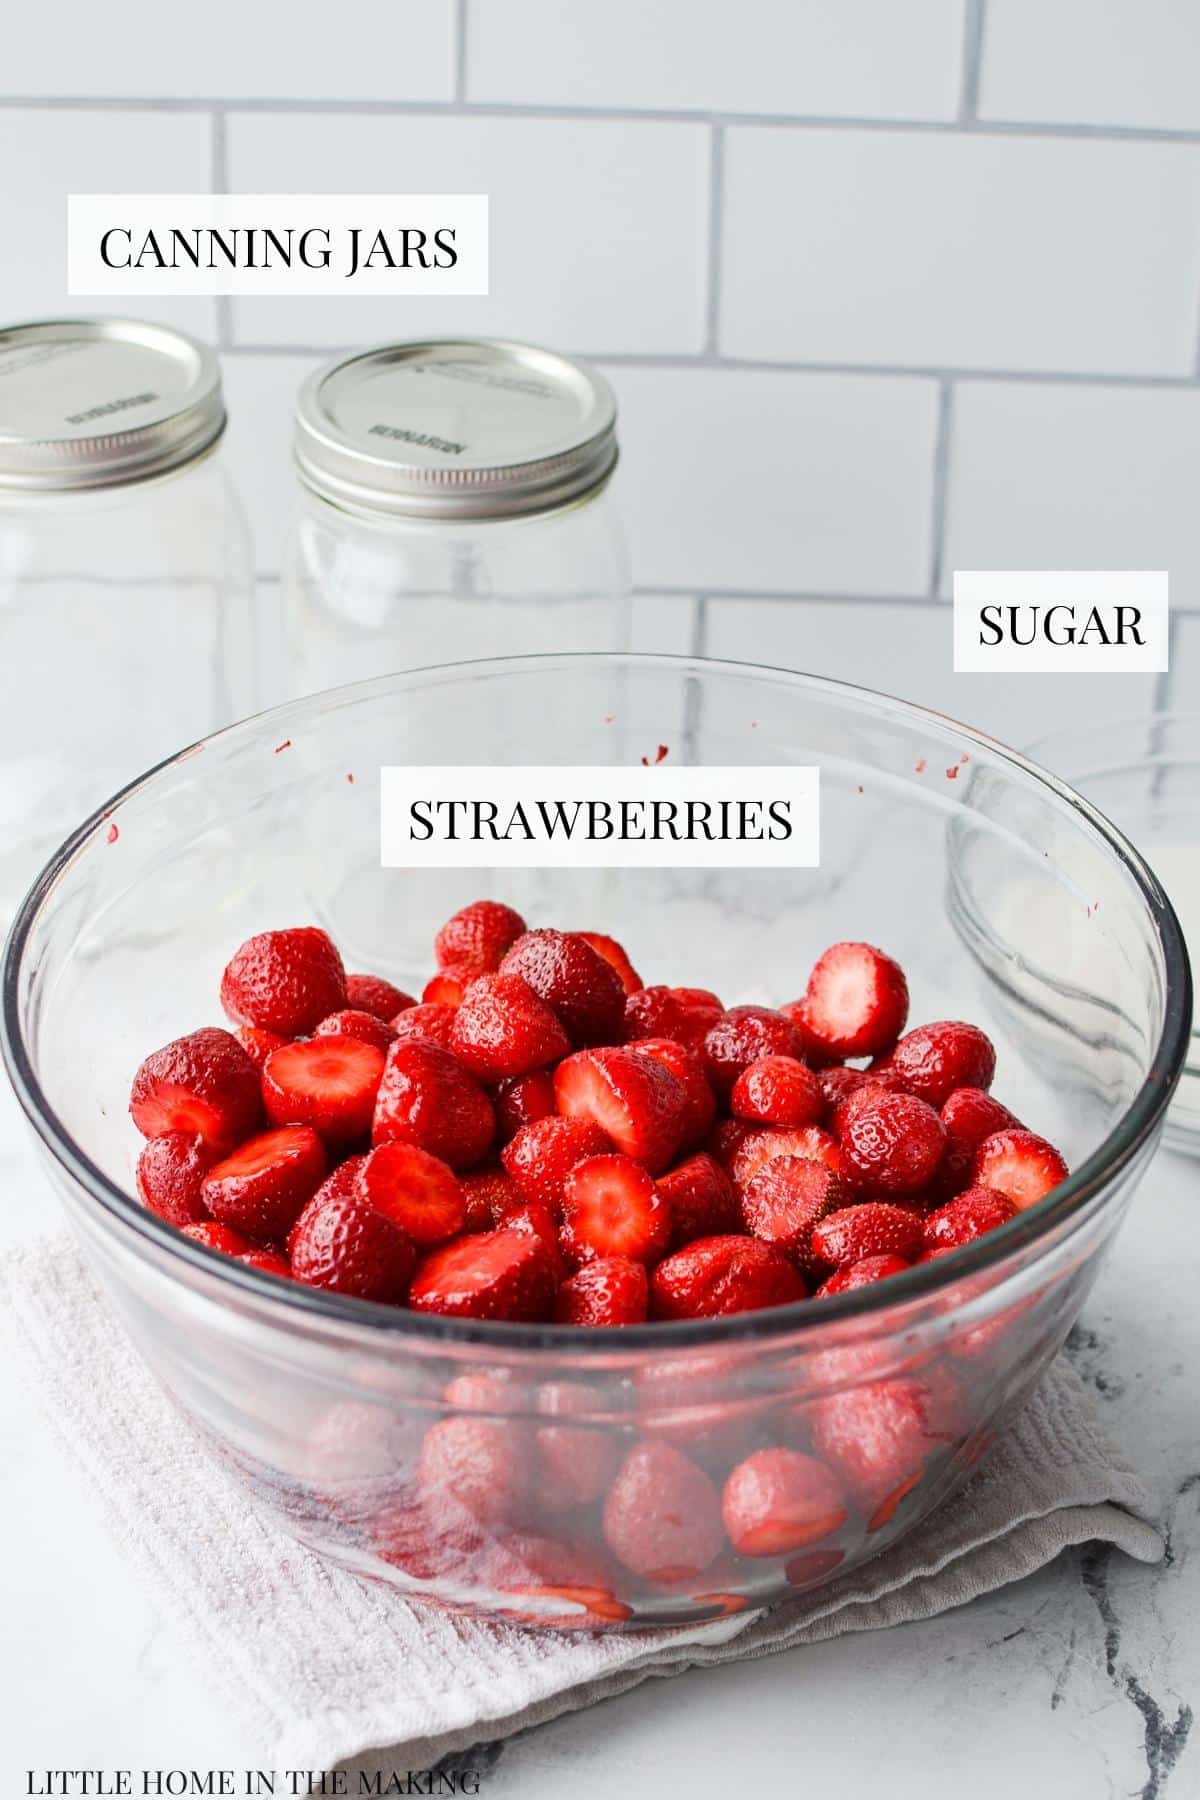 The ingredients needed to can strawberries: canning supplies, strawberries, and sugar.